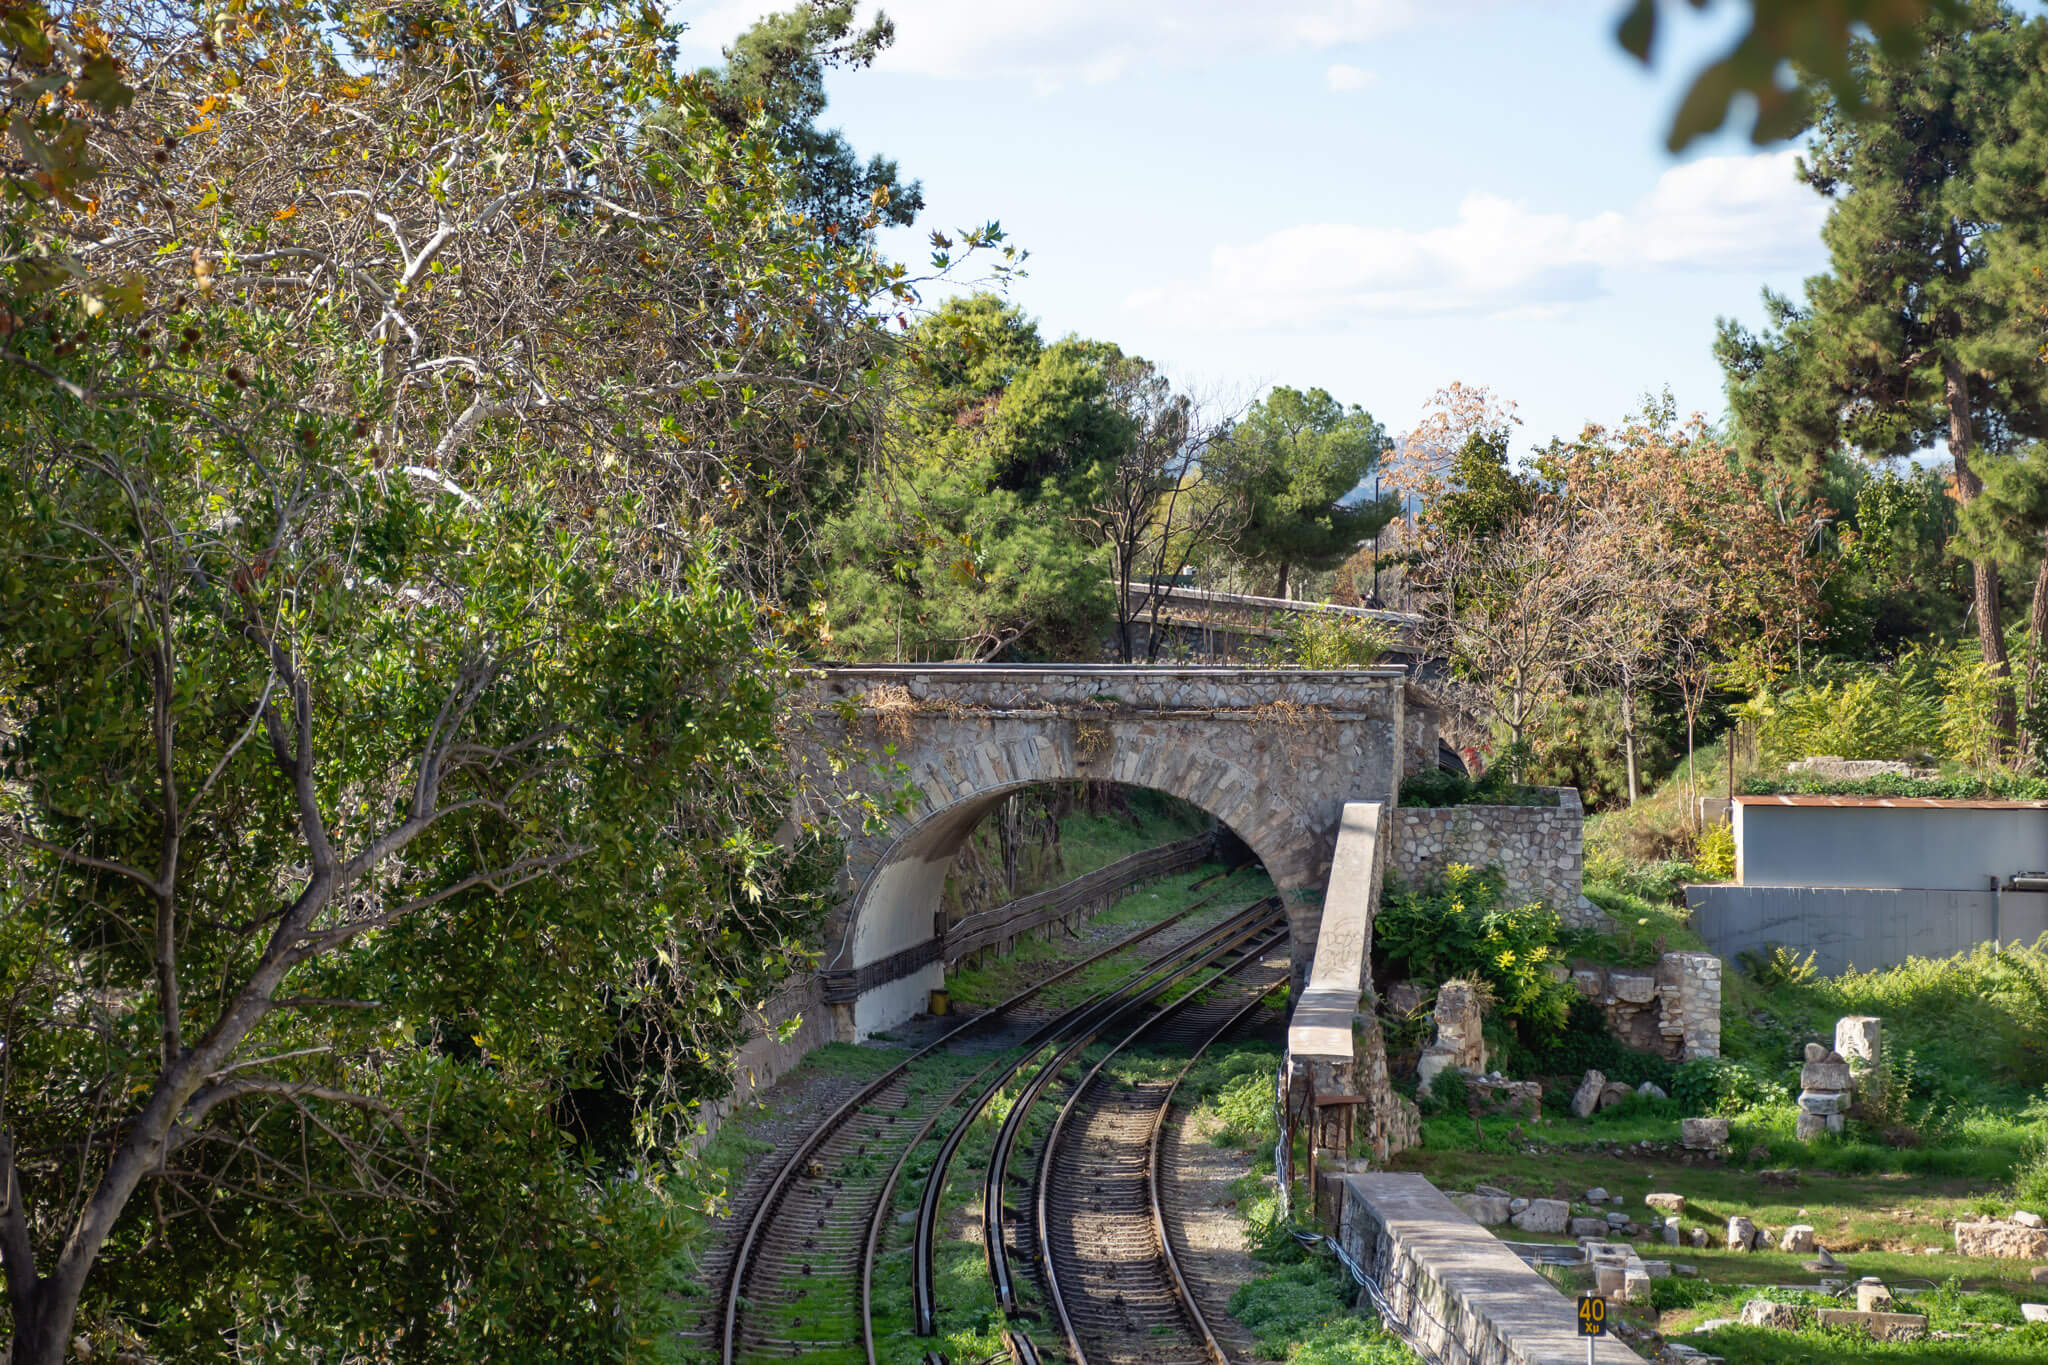 Train tracks and tunnel in Athens at the Ancient Greek Agora